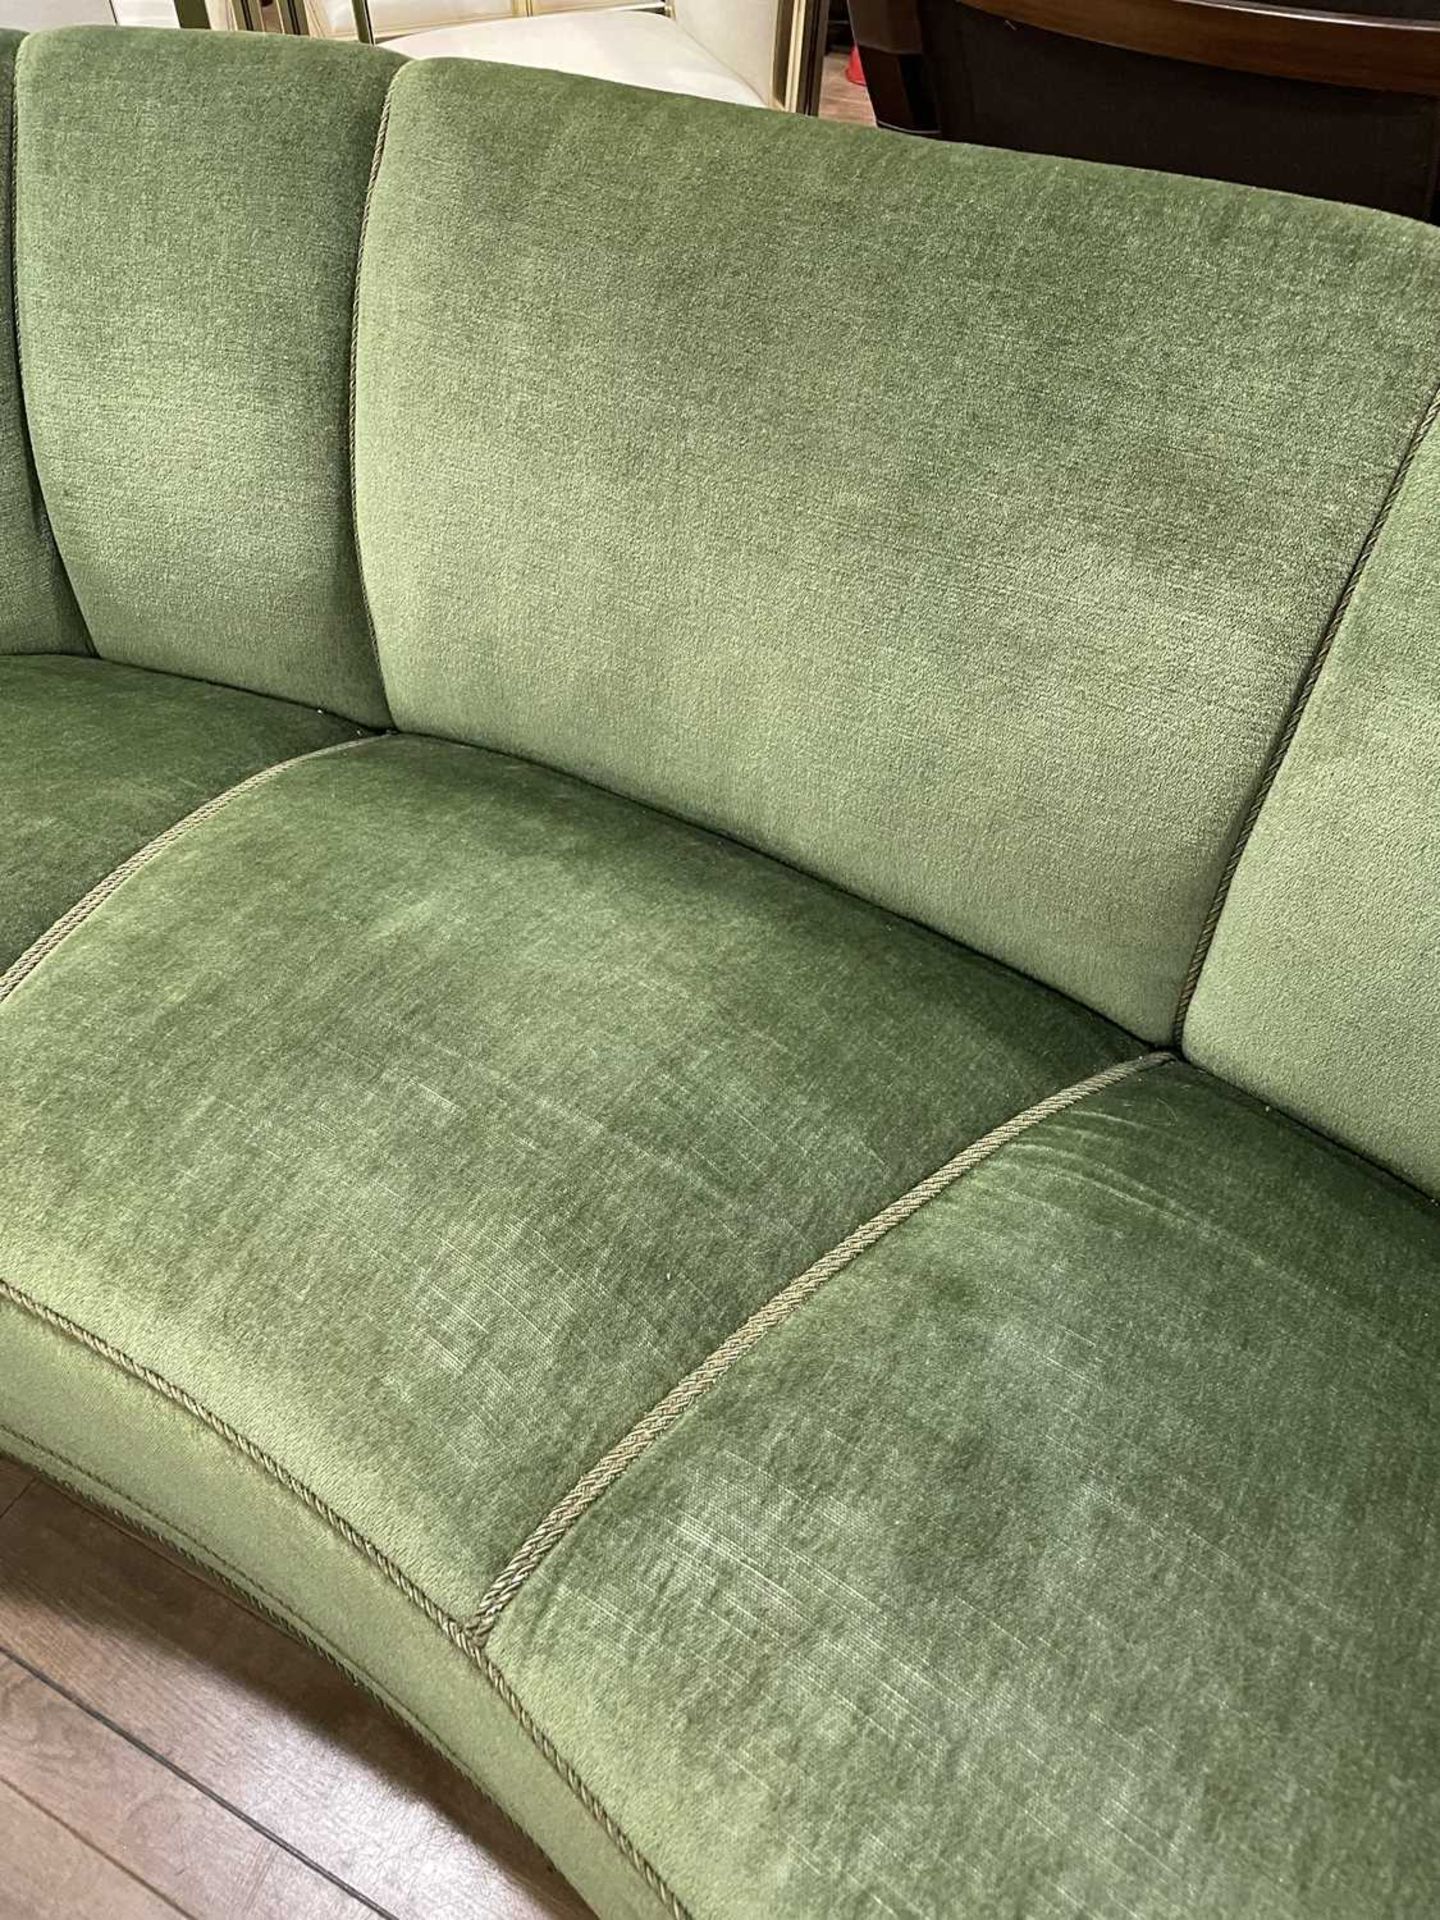 A 1940/50's Danish 'Banana' sofa upholstered in green on mahogany block feet *Sold subject to our - Image 21 of 27